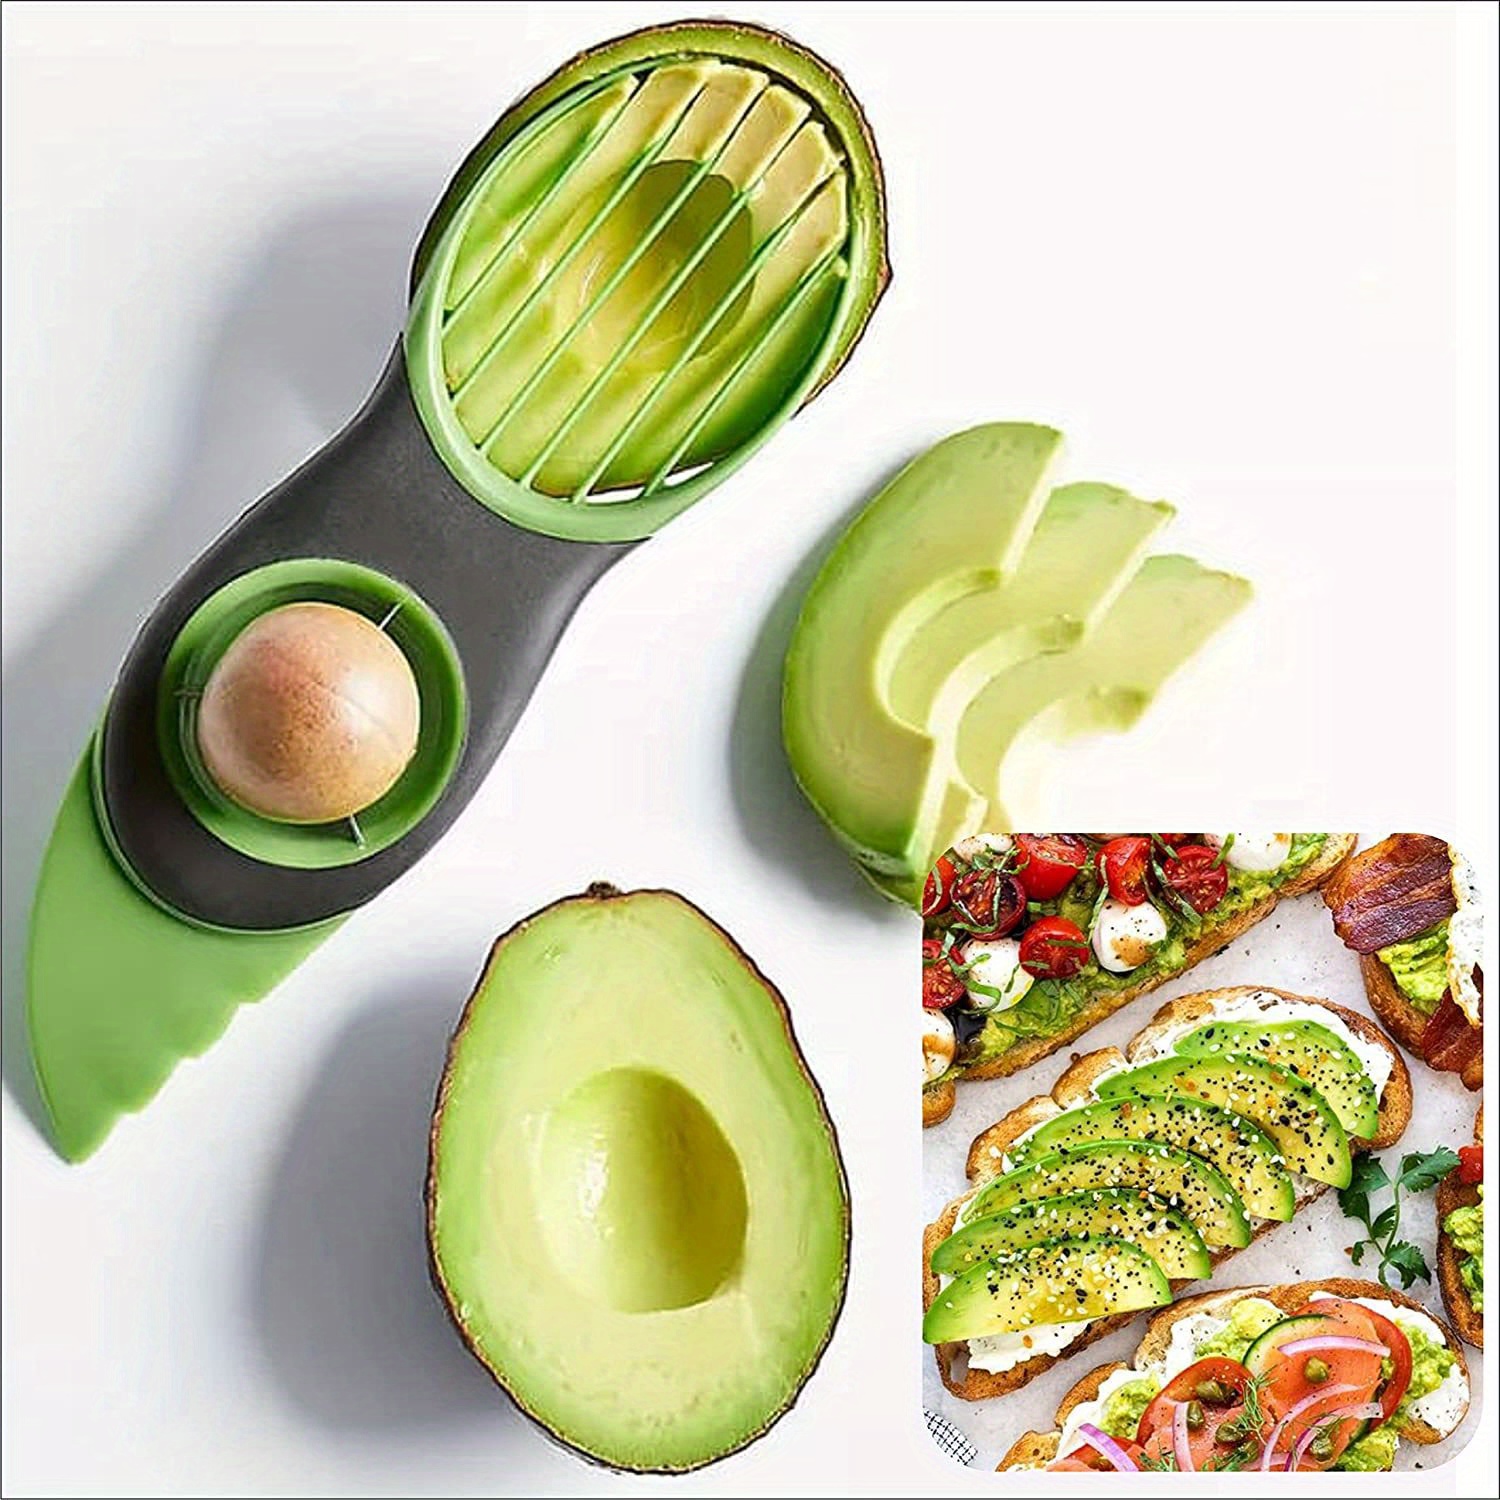 Avocado Slicer Avocado Knife Slicer Tool Avocado Tool Avocado Cutter with Grip Handle and Avocado Keeper Peach Pitter for Kitchen Food Vegetable